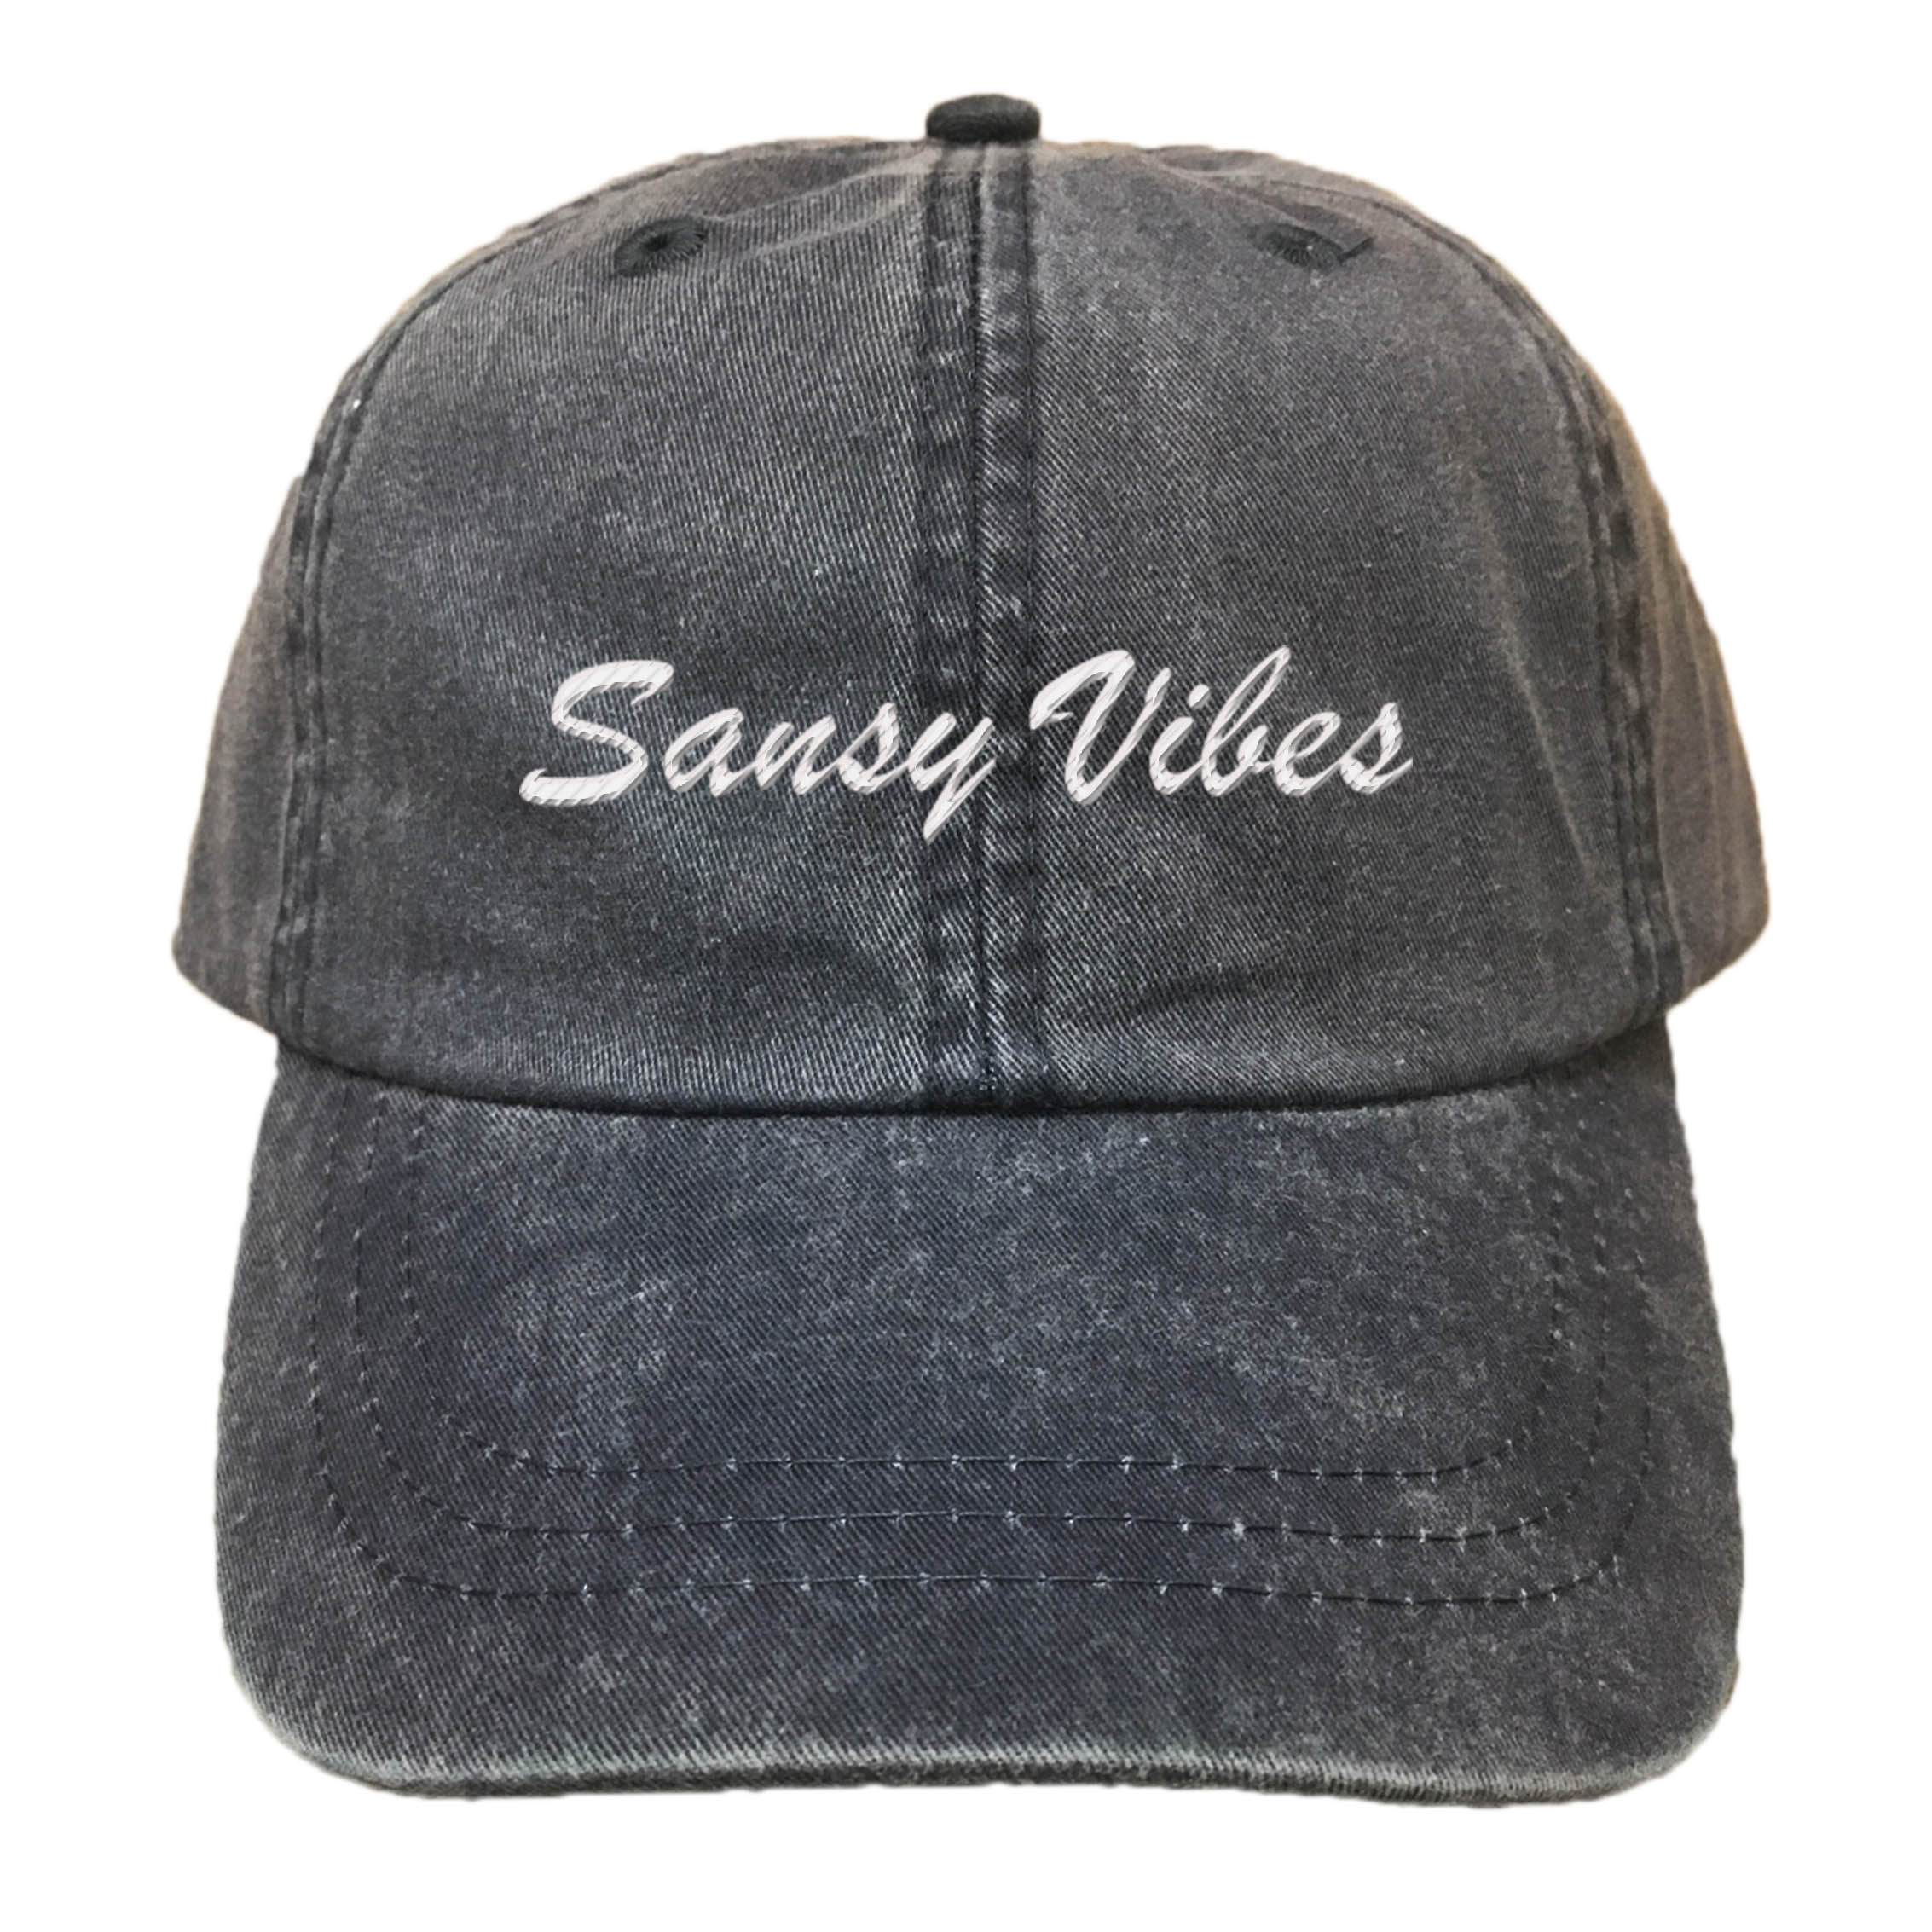 Sansy Vibes Script EMBROIDERED Cotton Twill HAT